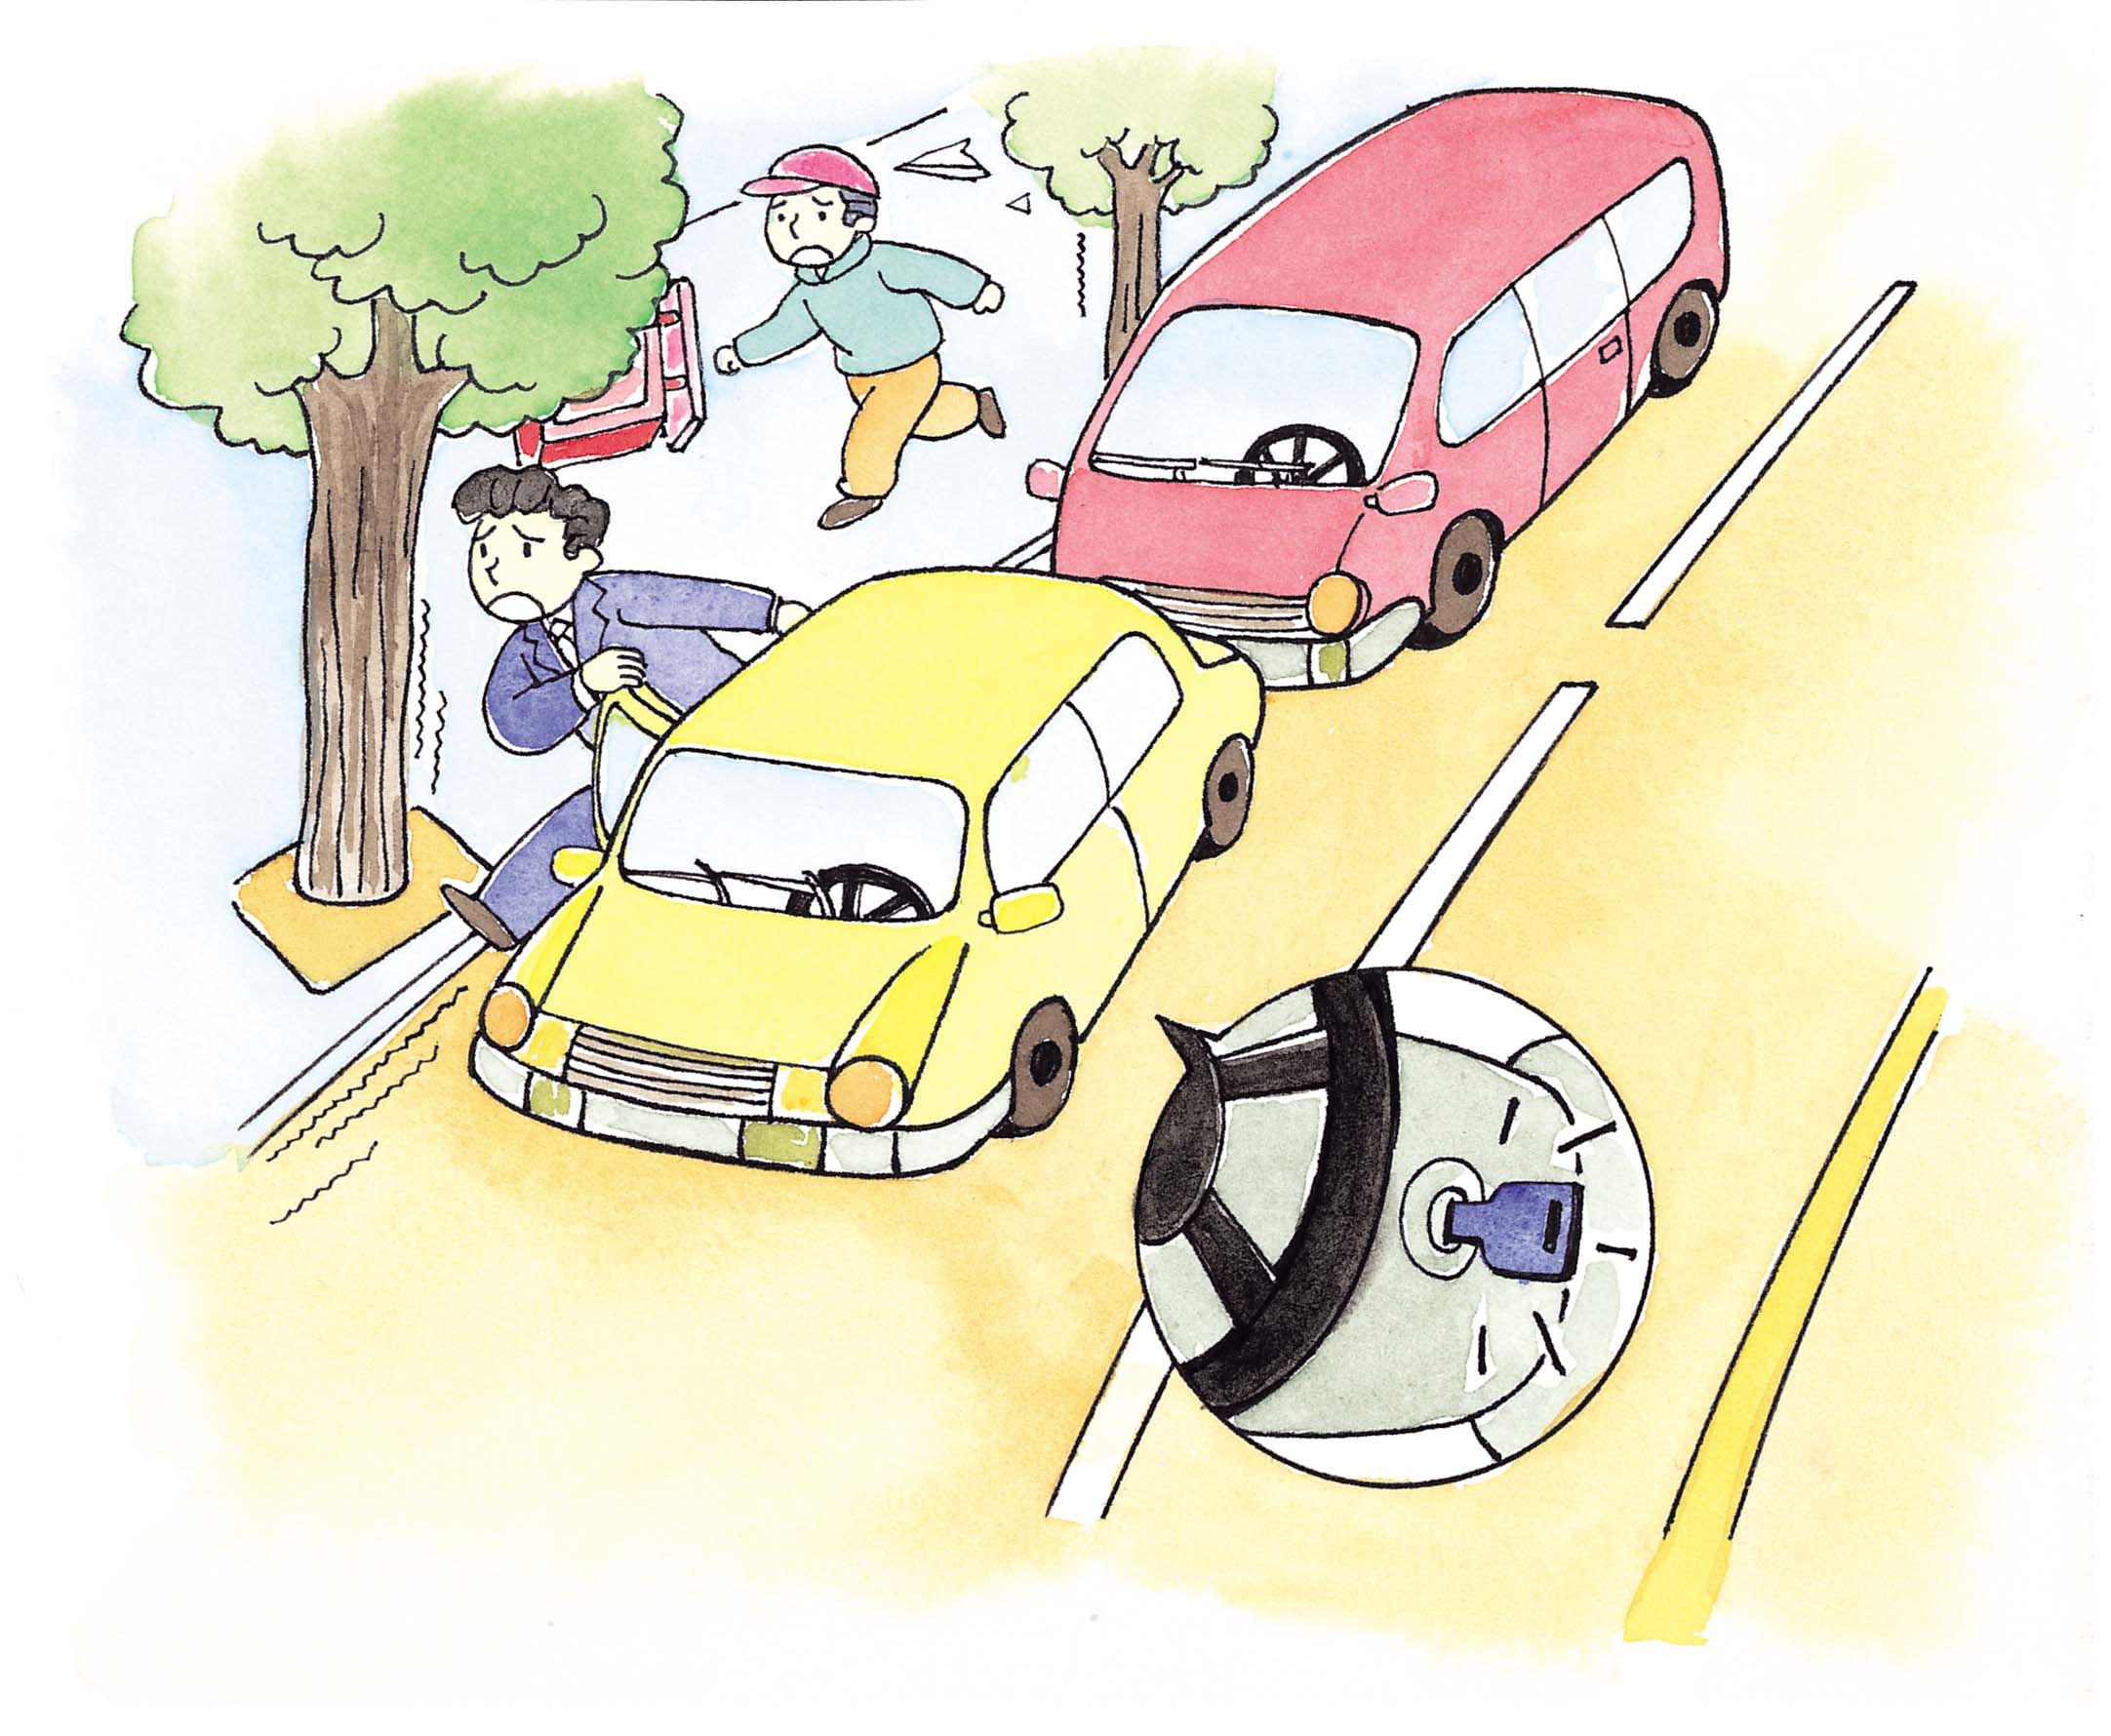 Park the car on the right side of the road and do not drive in restricted areas. Careless driving with poor judgment will cause confusion; listen to the car radio for instructions on what to do.